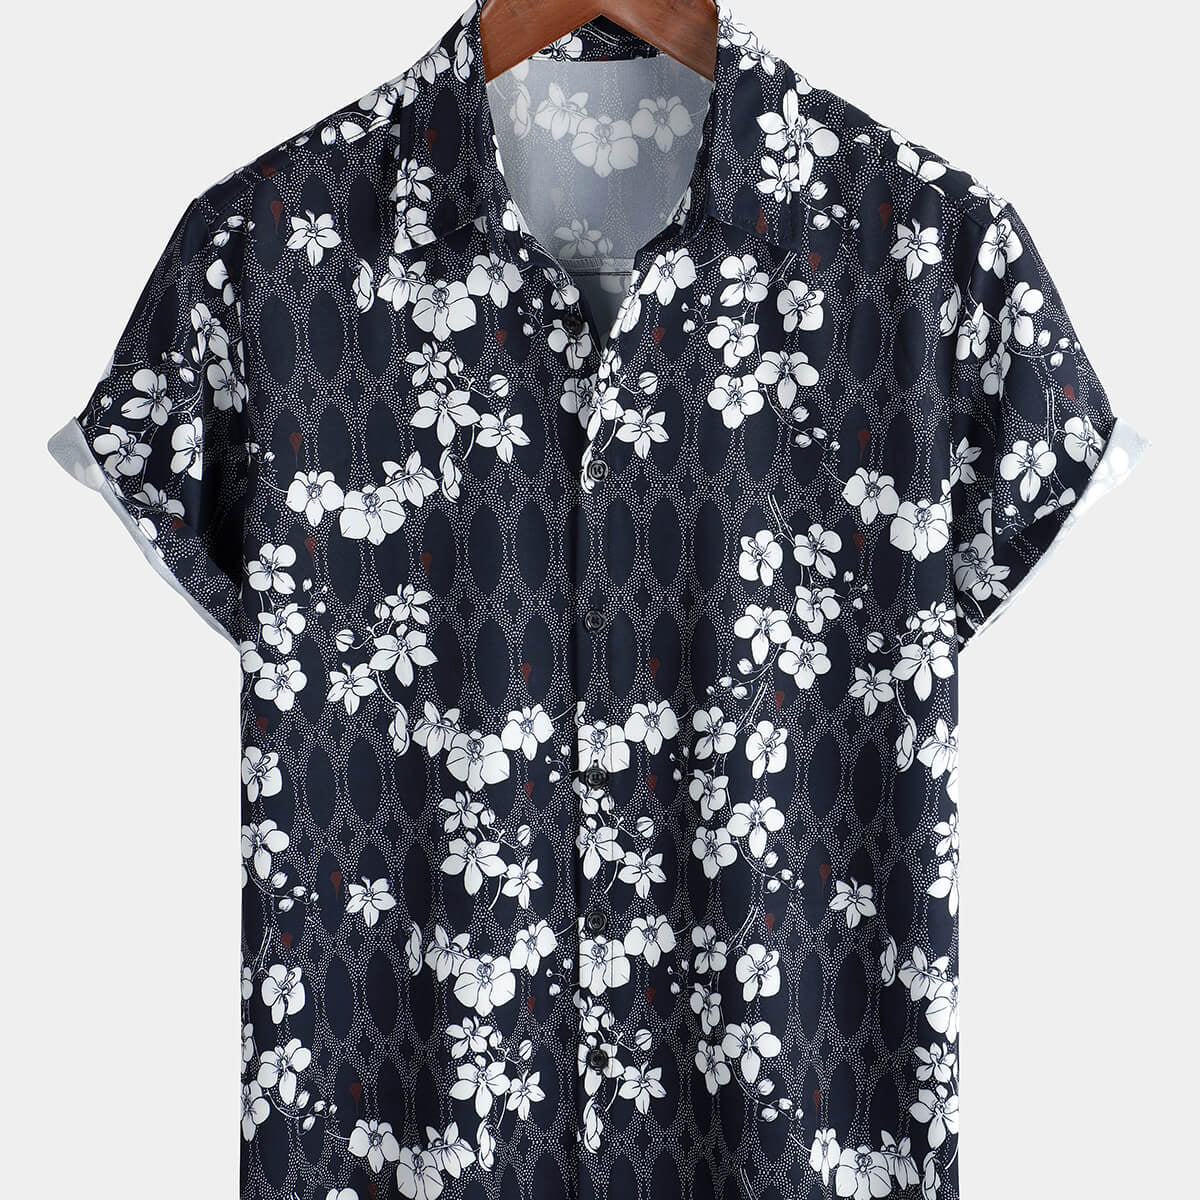 Men's Cherry Blooms Floral Holiday Navy Blue Short Sleeve Button Up Shirt